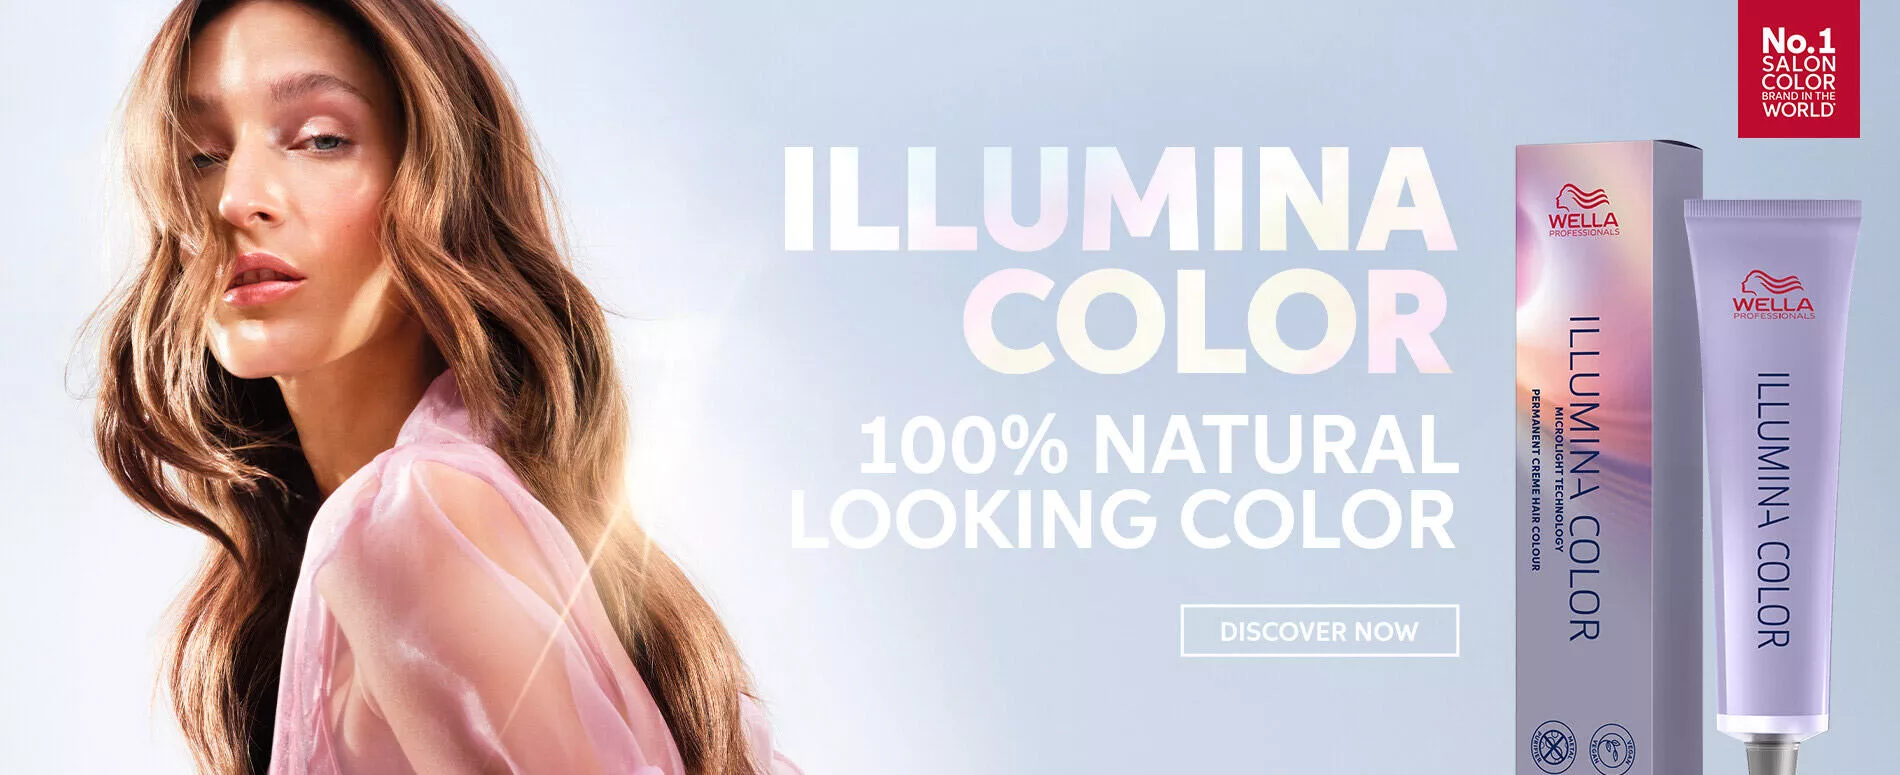 Illumina color banner with new packaging and new brunette model with 100% natural looking colour